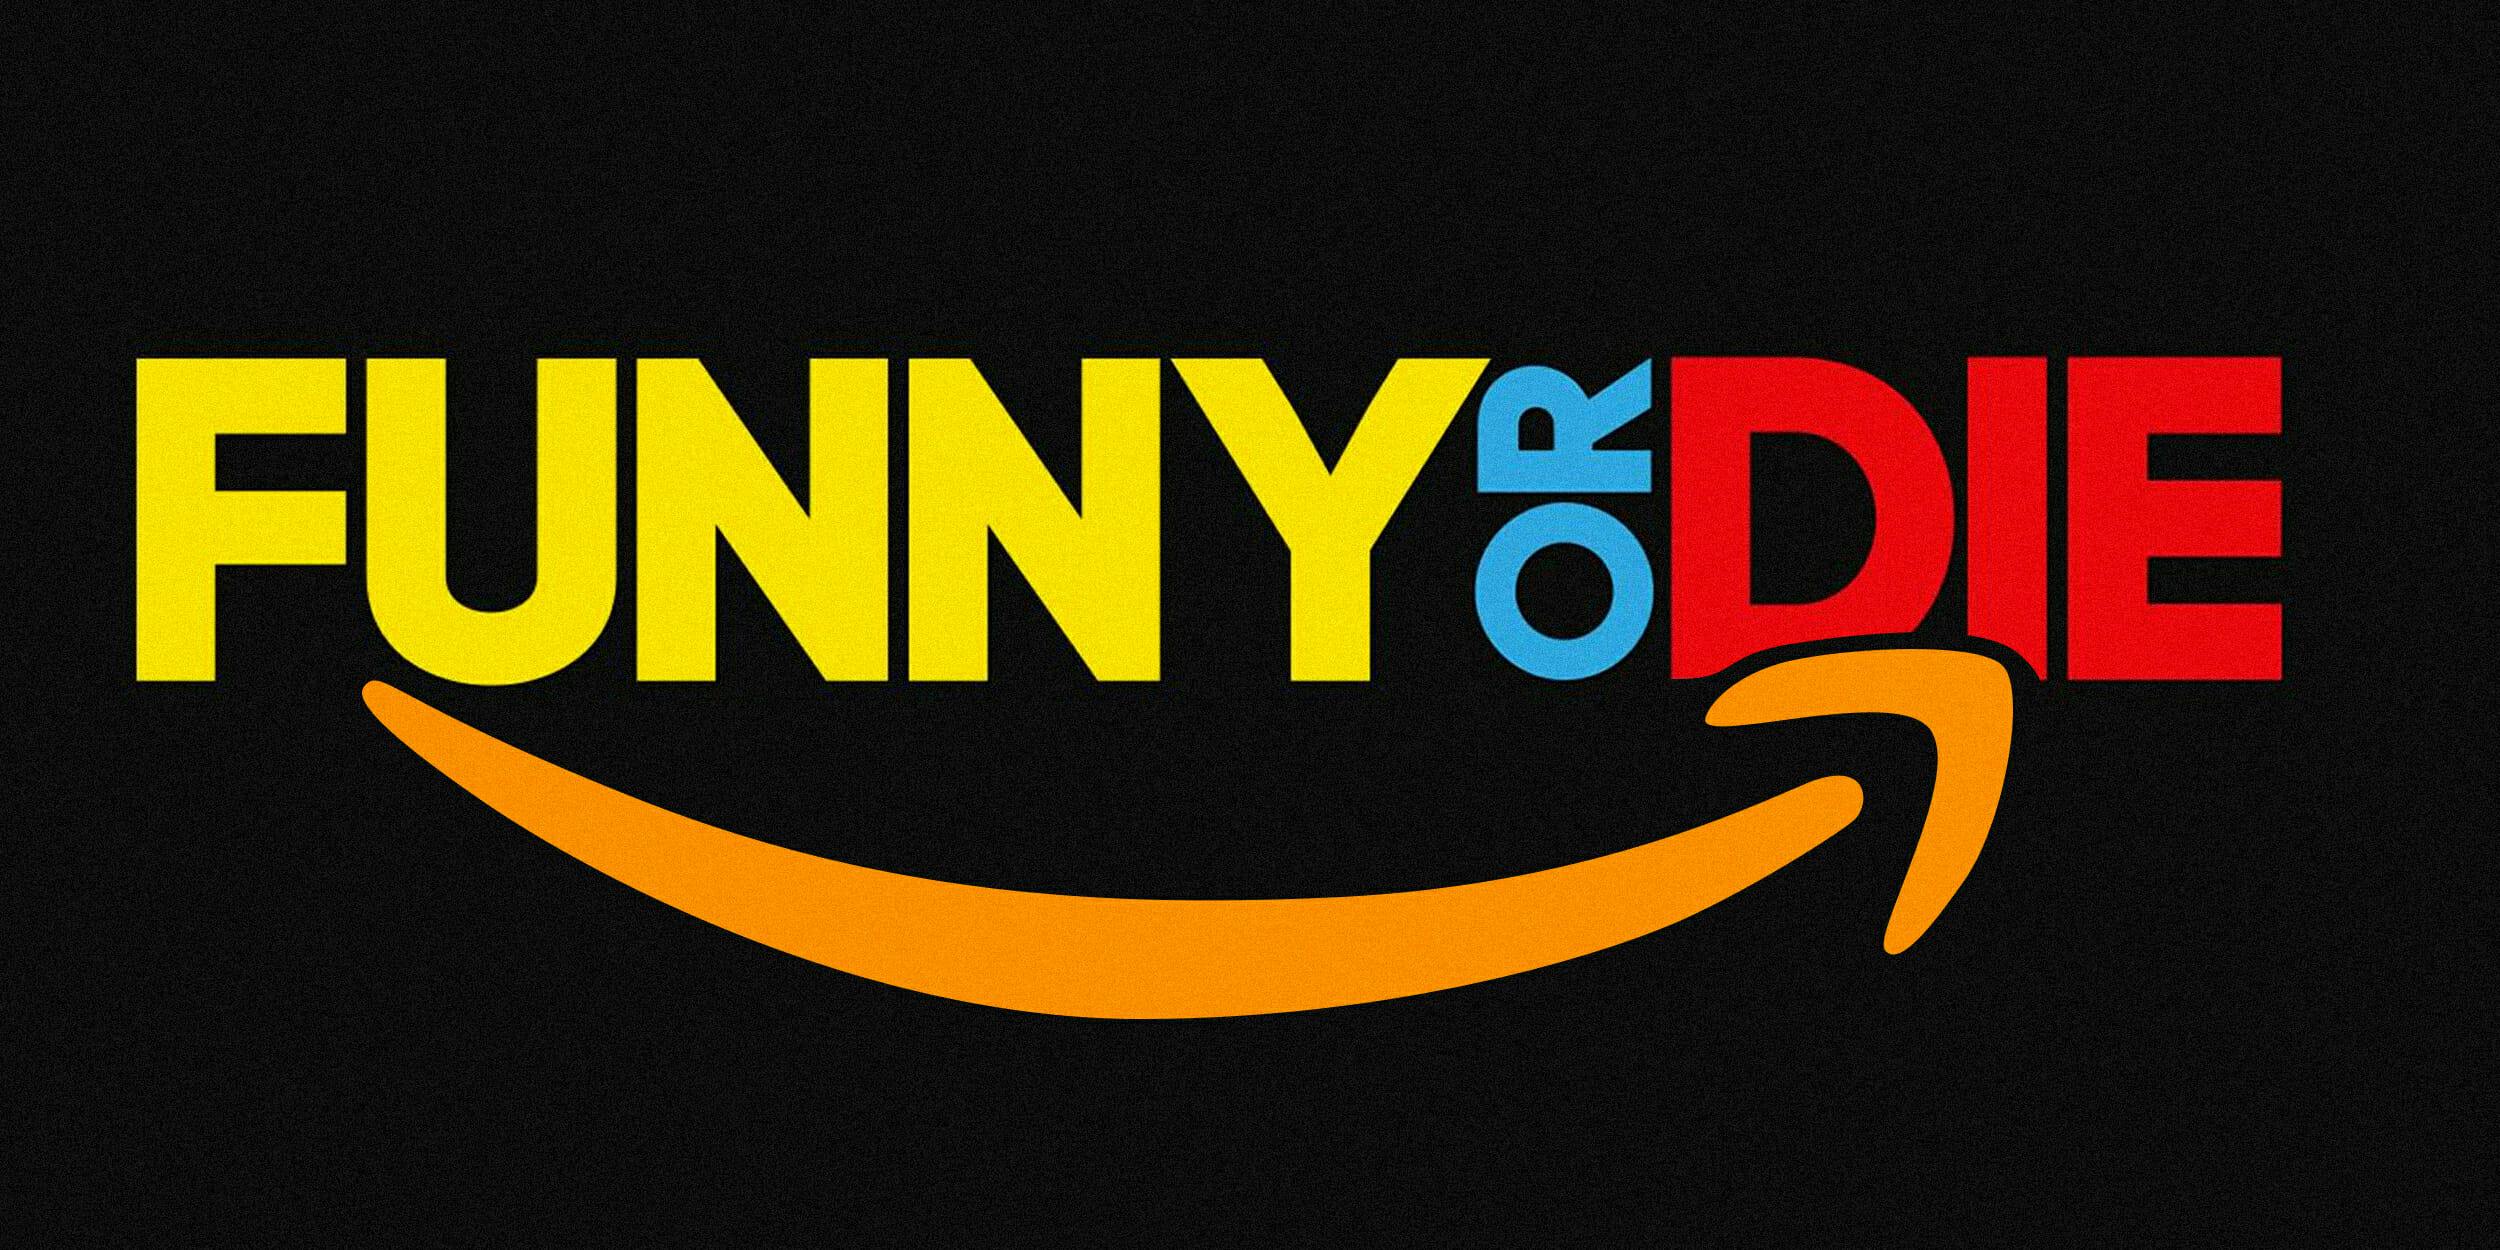 Amazon and Funny or Die logo mashup